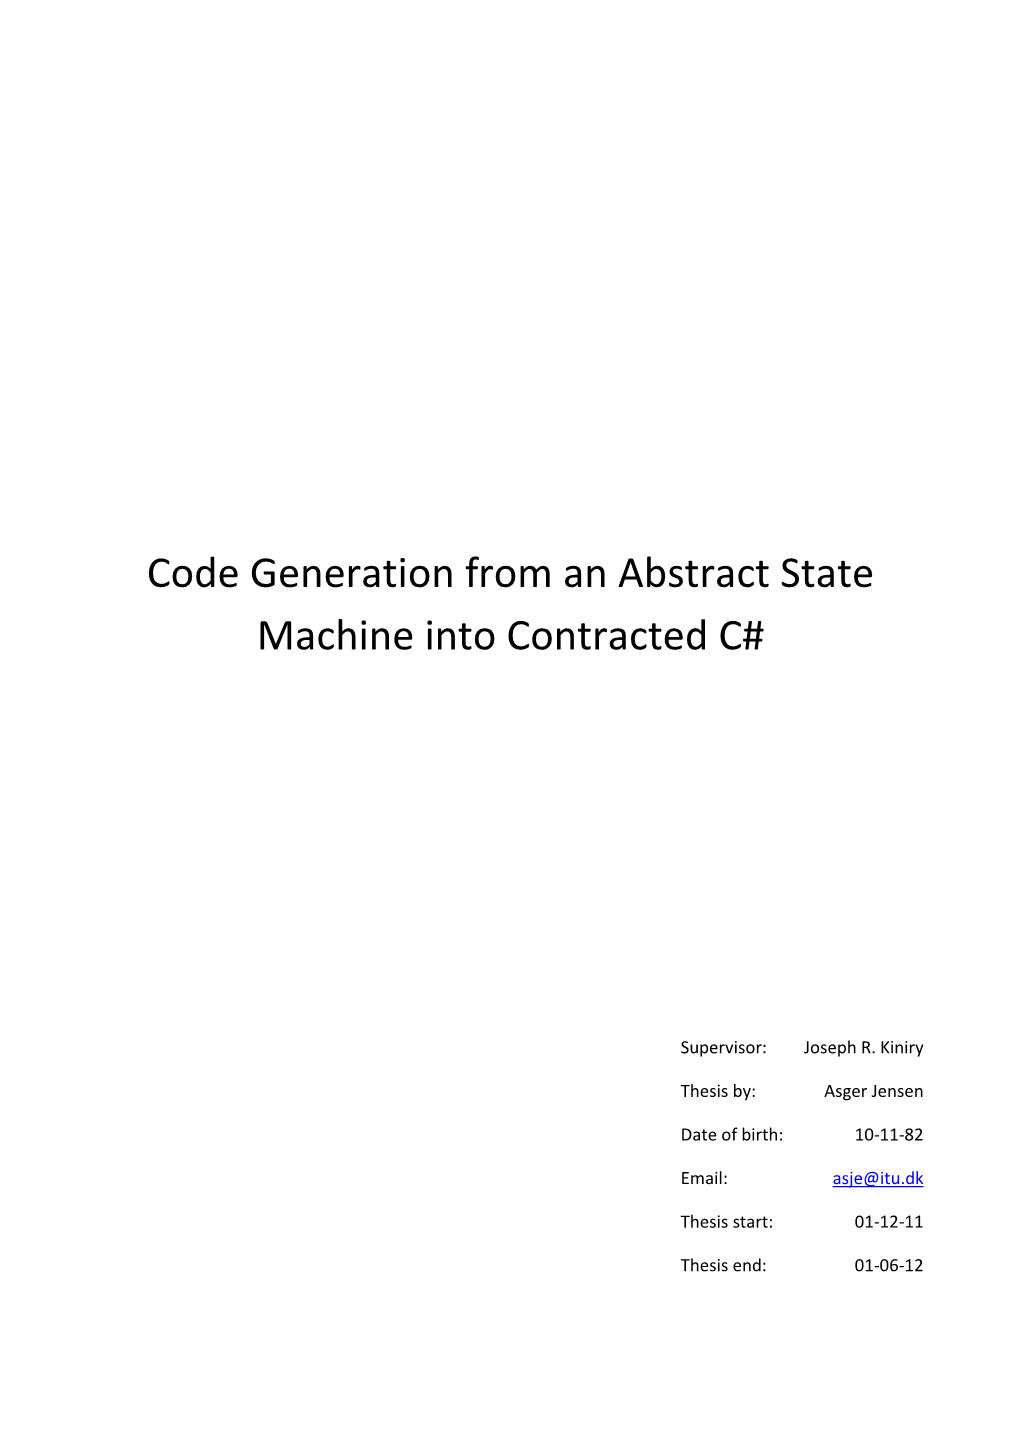 Code Generation from an Abstract State Machine Into Contracted C